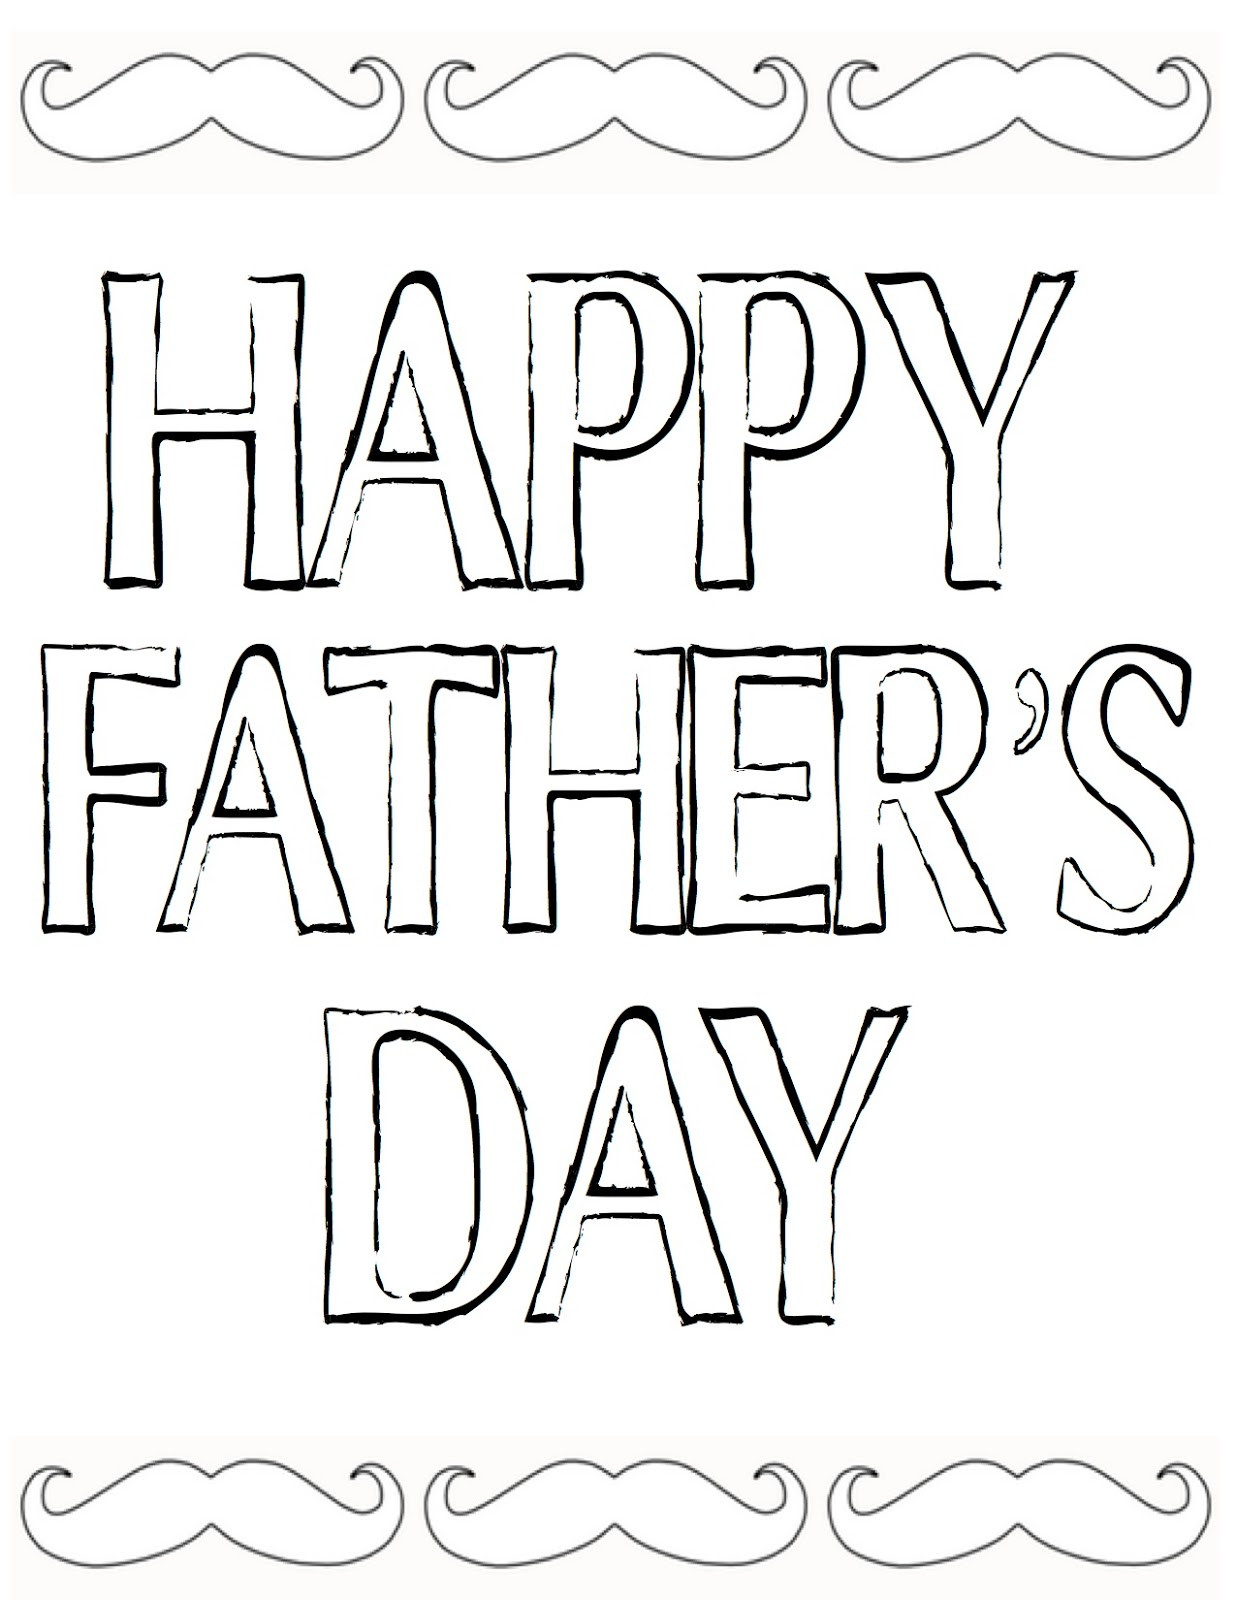 Happy Fathers Day Coloring Pages Printable
 Free Happy Fathers Day Coloring Pages Printable Sheets